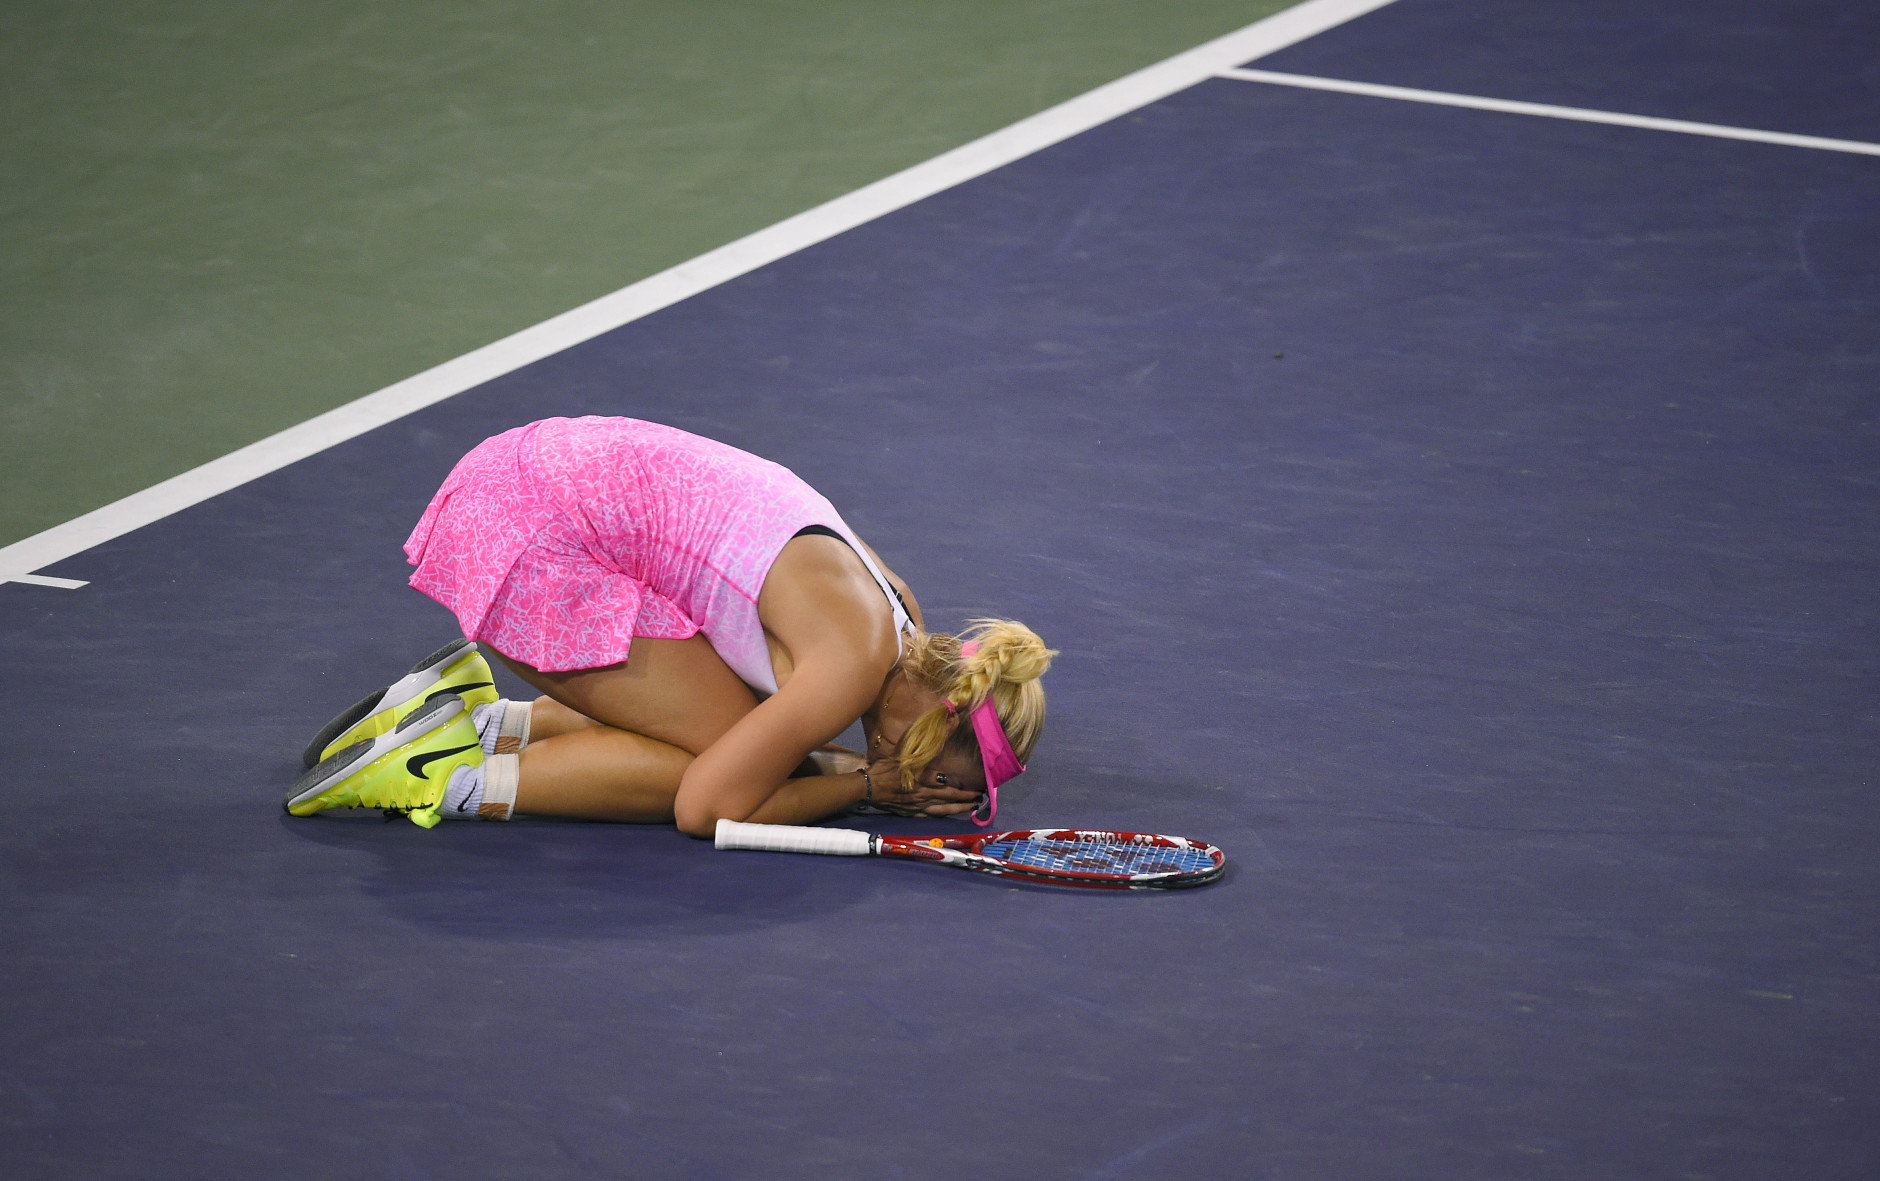 Sabine Lisicki, of Germany, celebrates after defeating Flavia Pennetta, of Italy, in their match at the BNP Paribas Open tennis tournament, Thursday, March 19, 2015, in Indian Wells, Calif. (AP Photo/Mark J. Terrill)